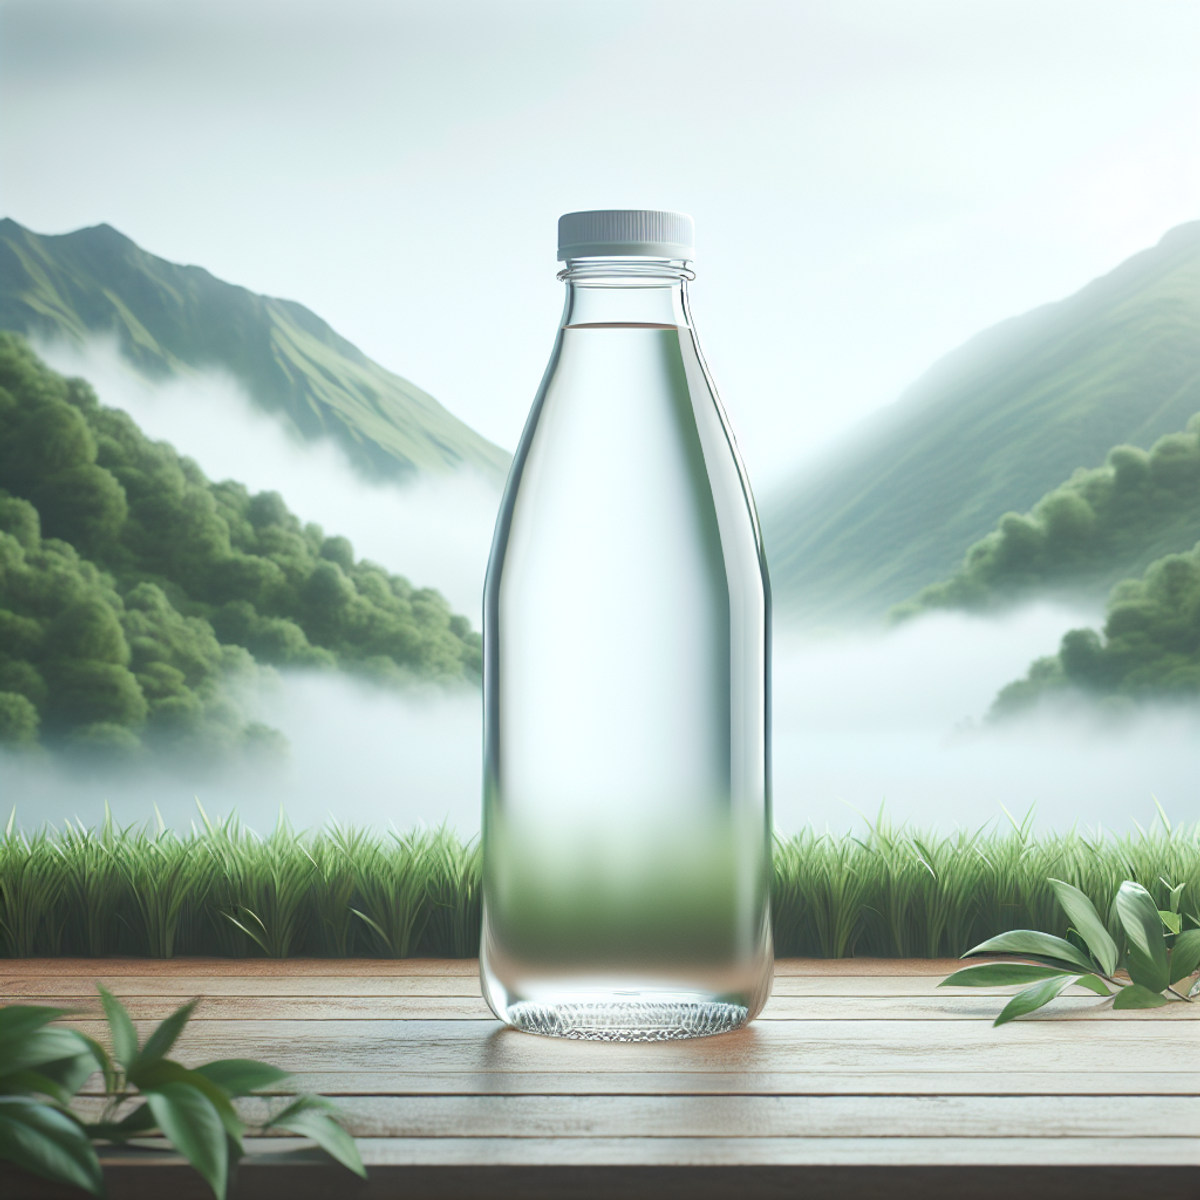 A clear glass water bottle with a bamboo lid, set against a backdrop of lush green foliage.